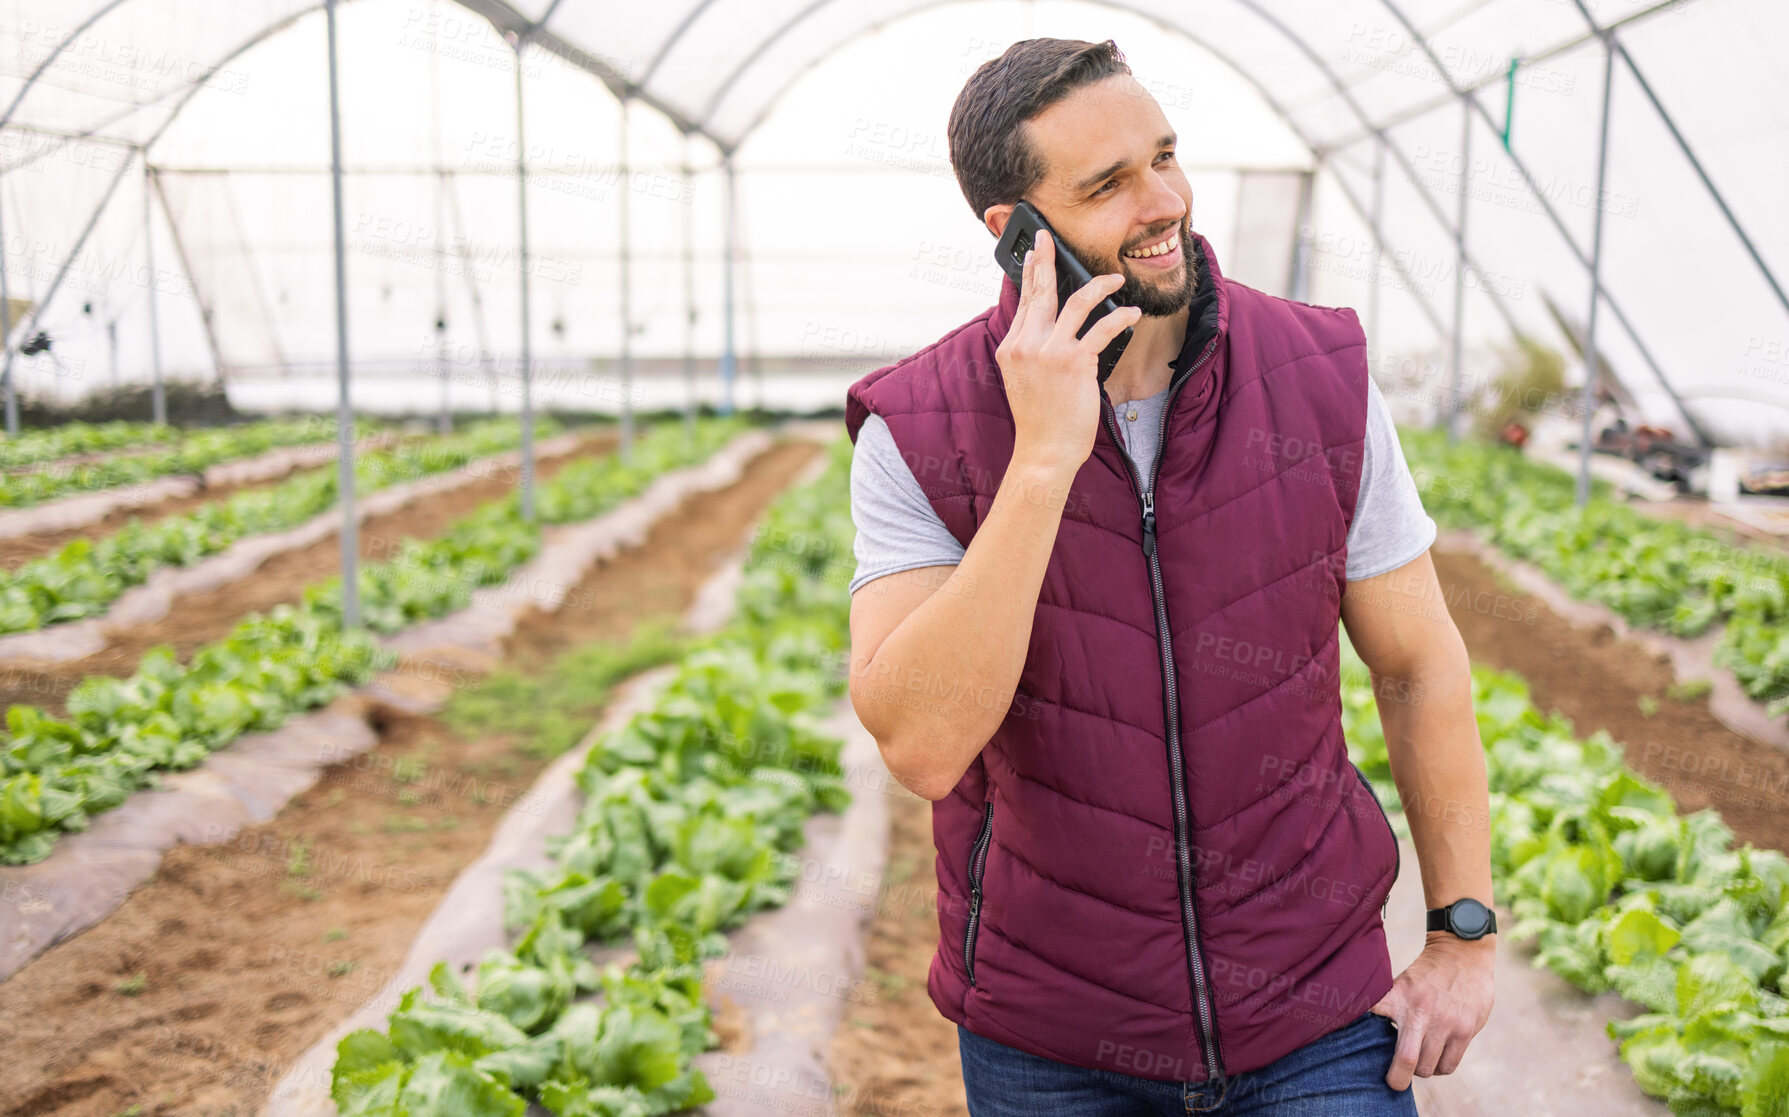 Buy stock photo Phone call, farm and agriculture with a man at work in the greenhouse of organic agricultural farmland. Mobile, communication and sustainability with a male working alone in the farming industry